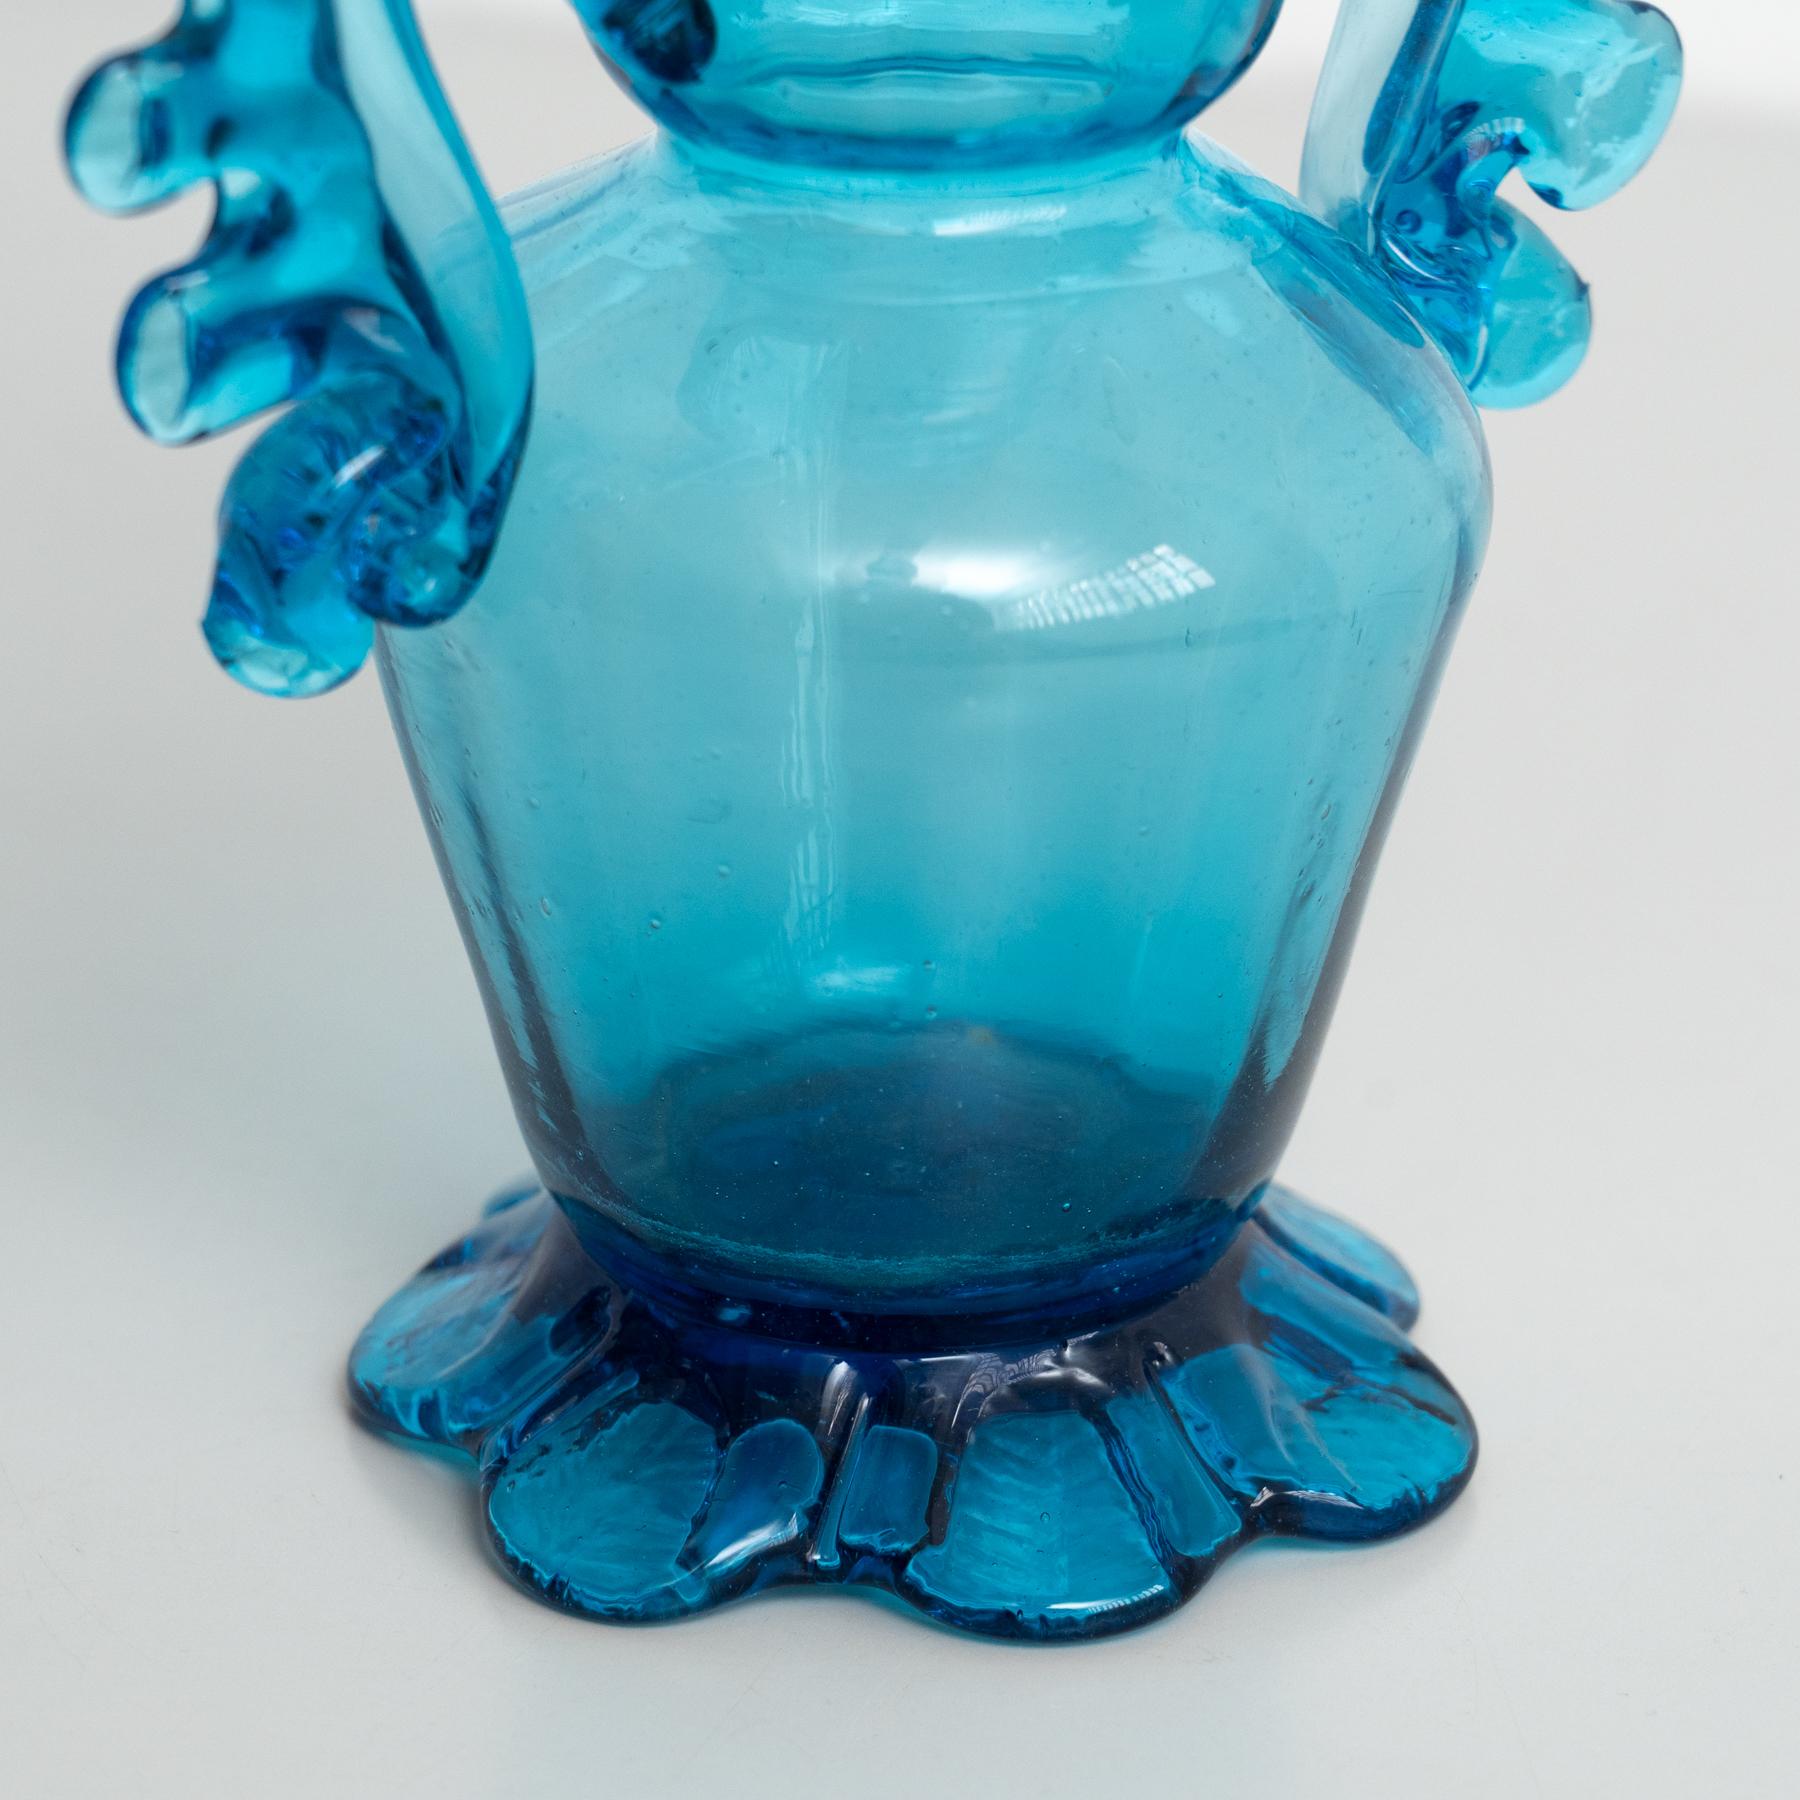 Exceptional Blown Glass Vase - Early XXth Century - Spanish Craftsmanship For Sale 3